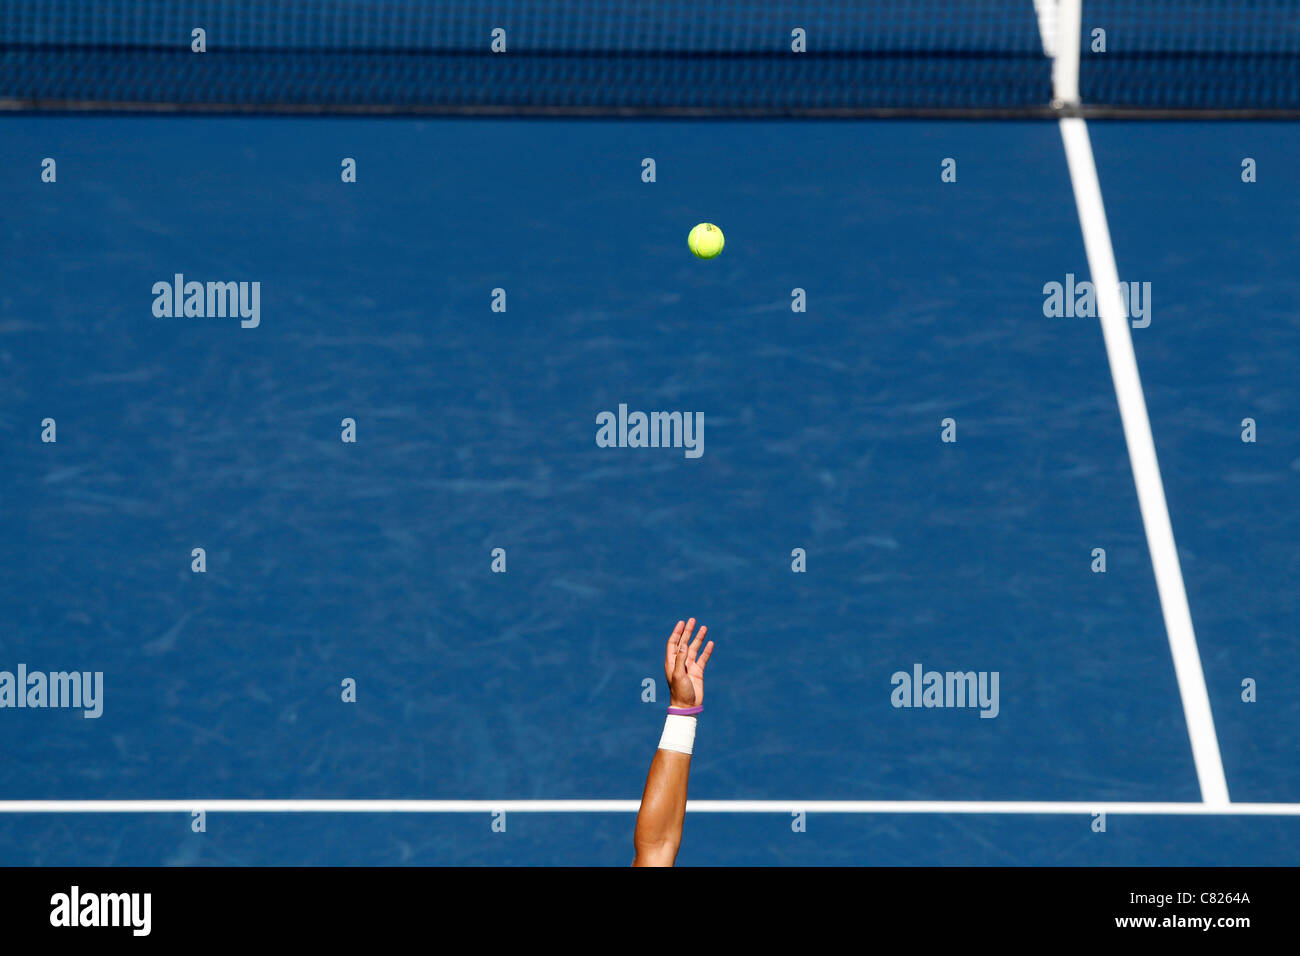 Tennis serve, arm tossing the ball in the air in front of the net at the US Open 2011 tennis tournament Stock Photo